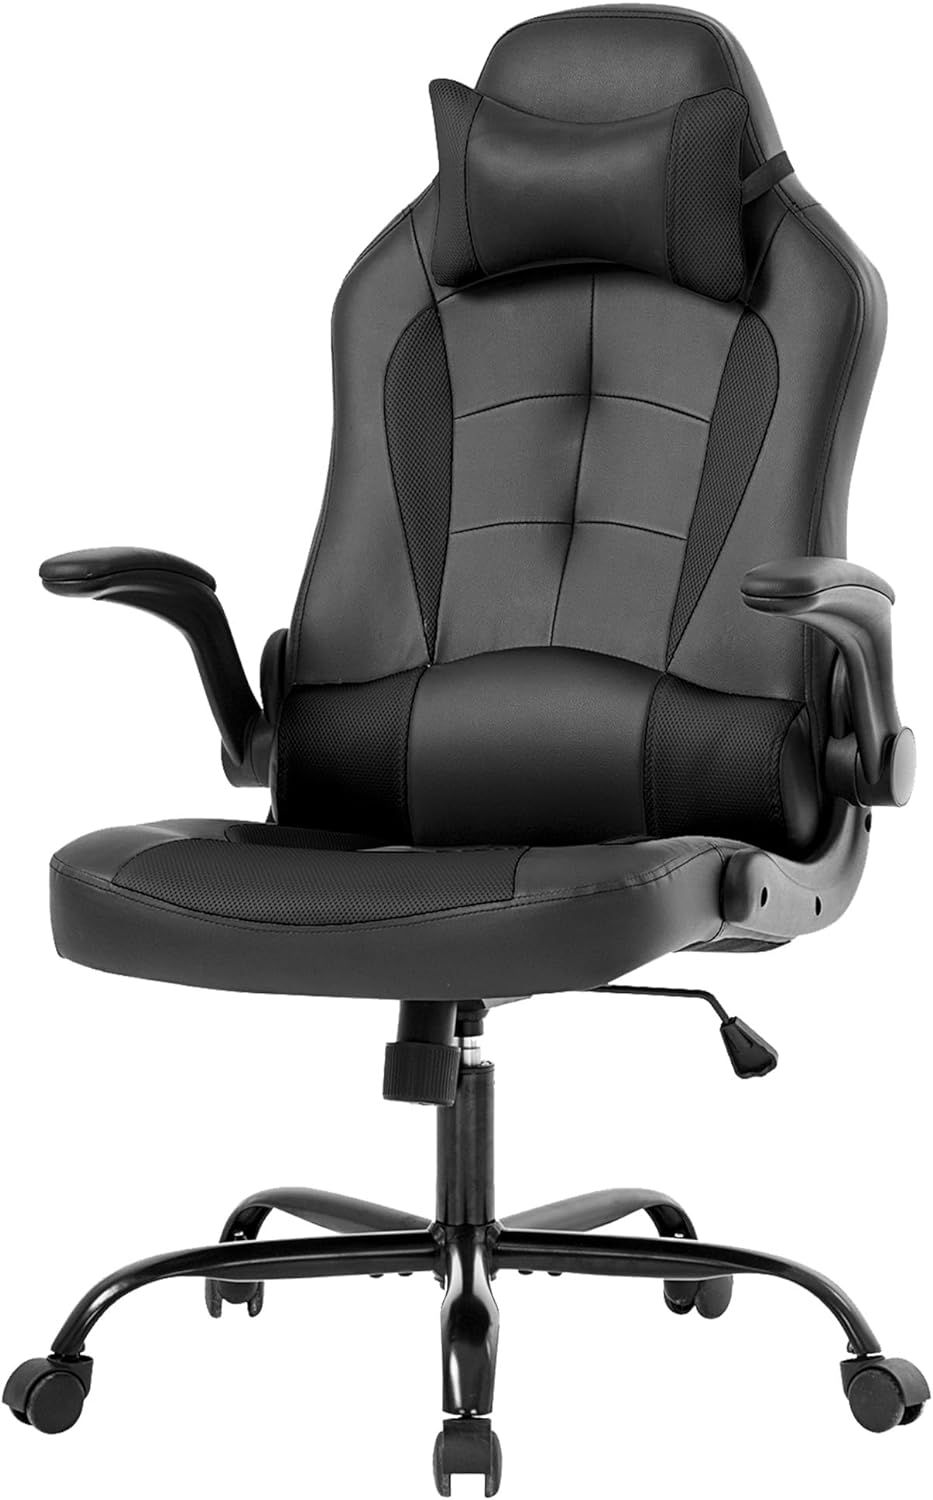 PayLessHere Gaming Chair